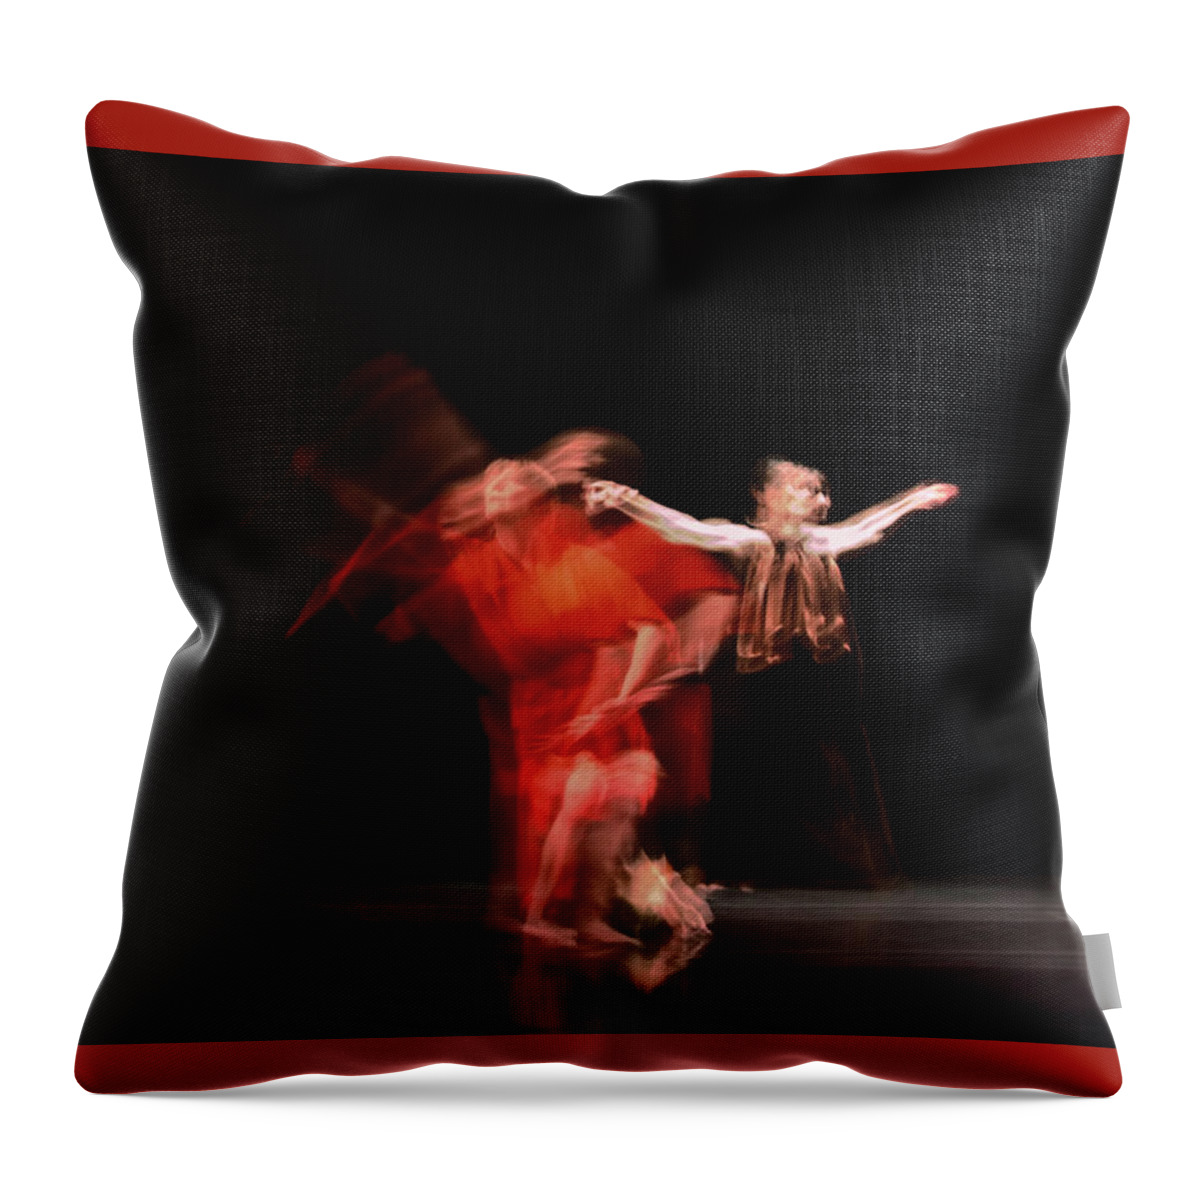 Crychord Throw Pillow featuring the photograph Visitation 2 by Catherine Sobredo